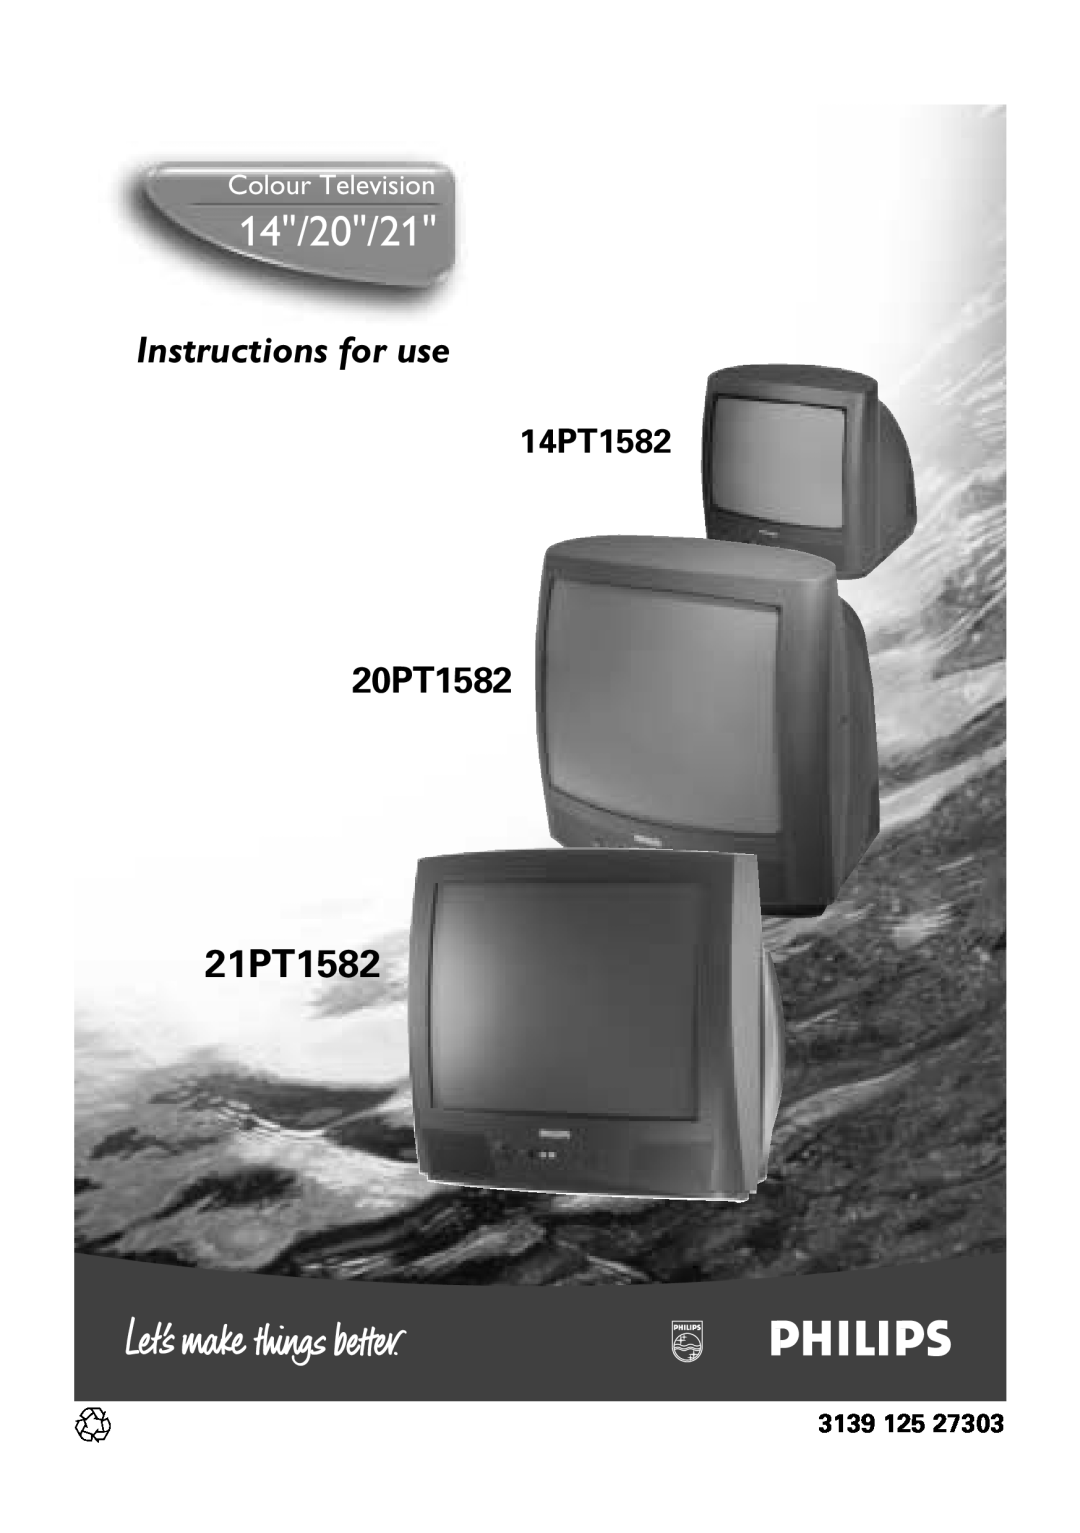 Philips 20PT1582 manual 3139, 14/20/21, Instructions for use, 21PT1582, 14PT1582, Colour Television 